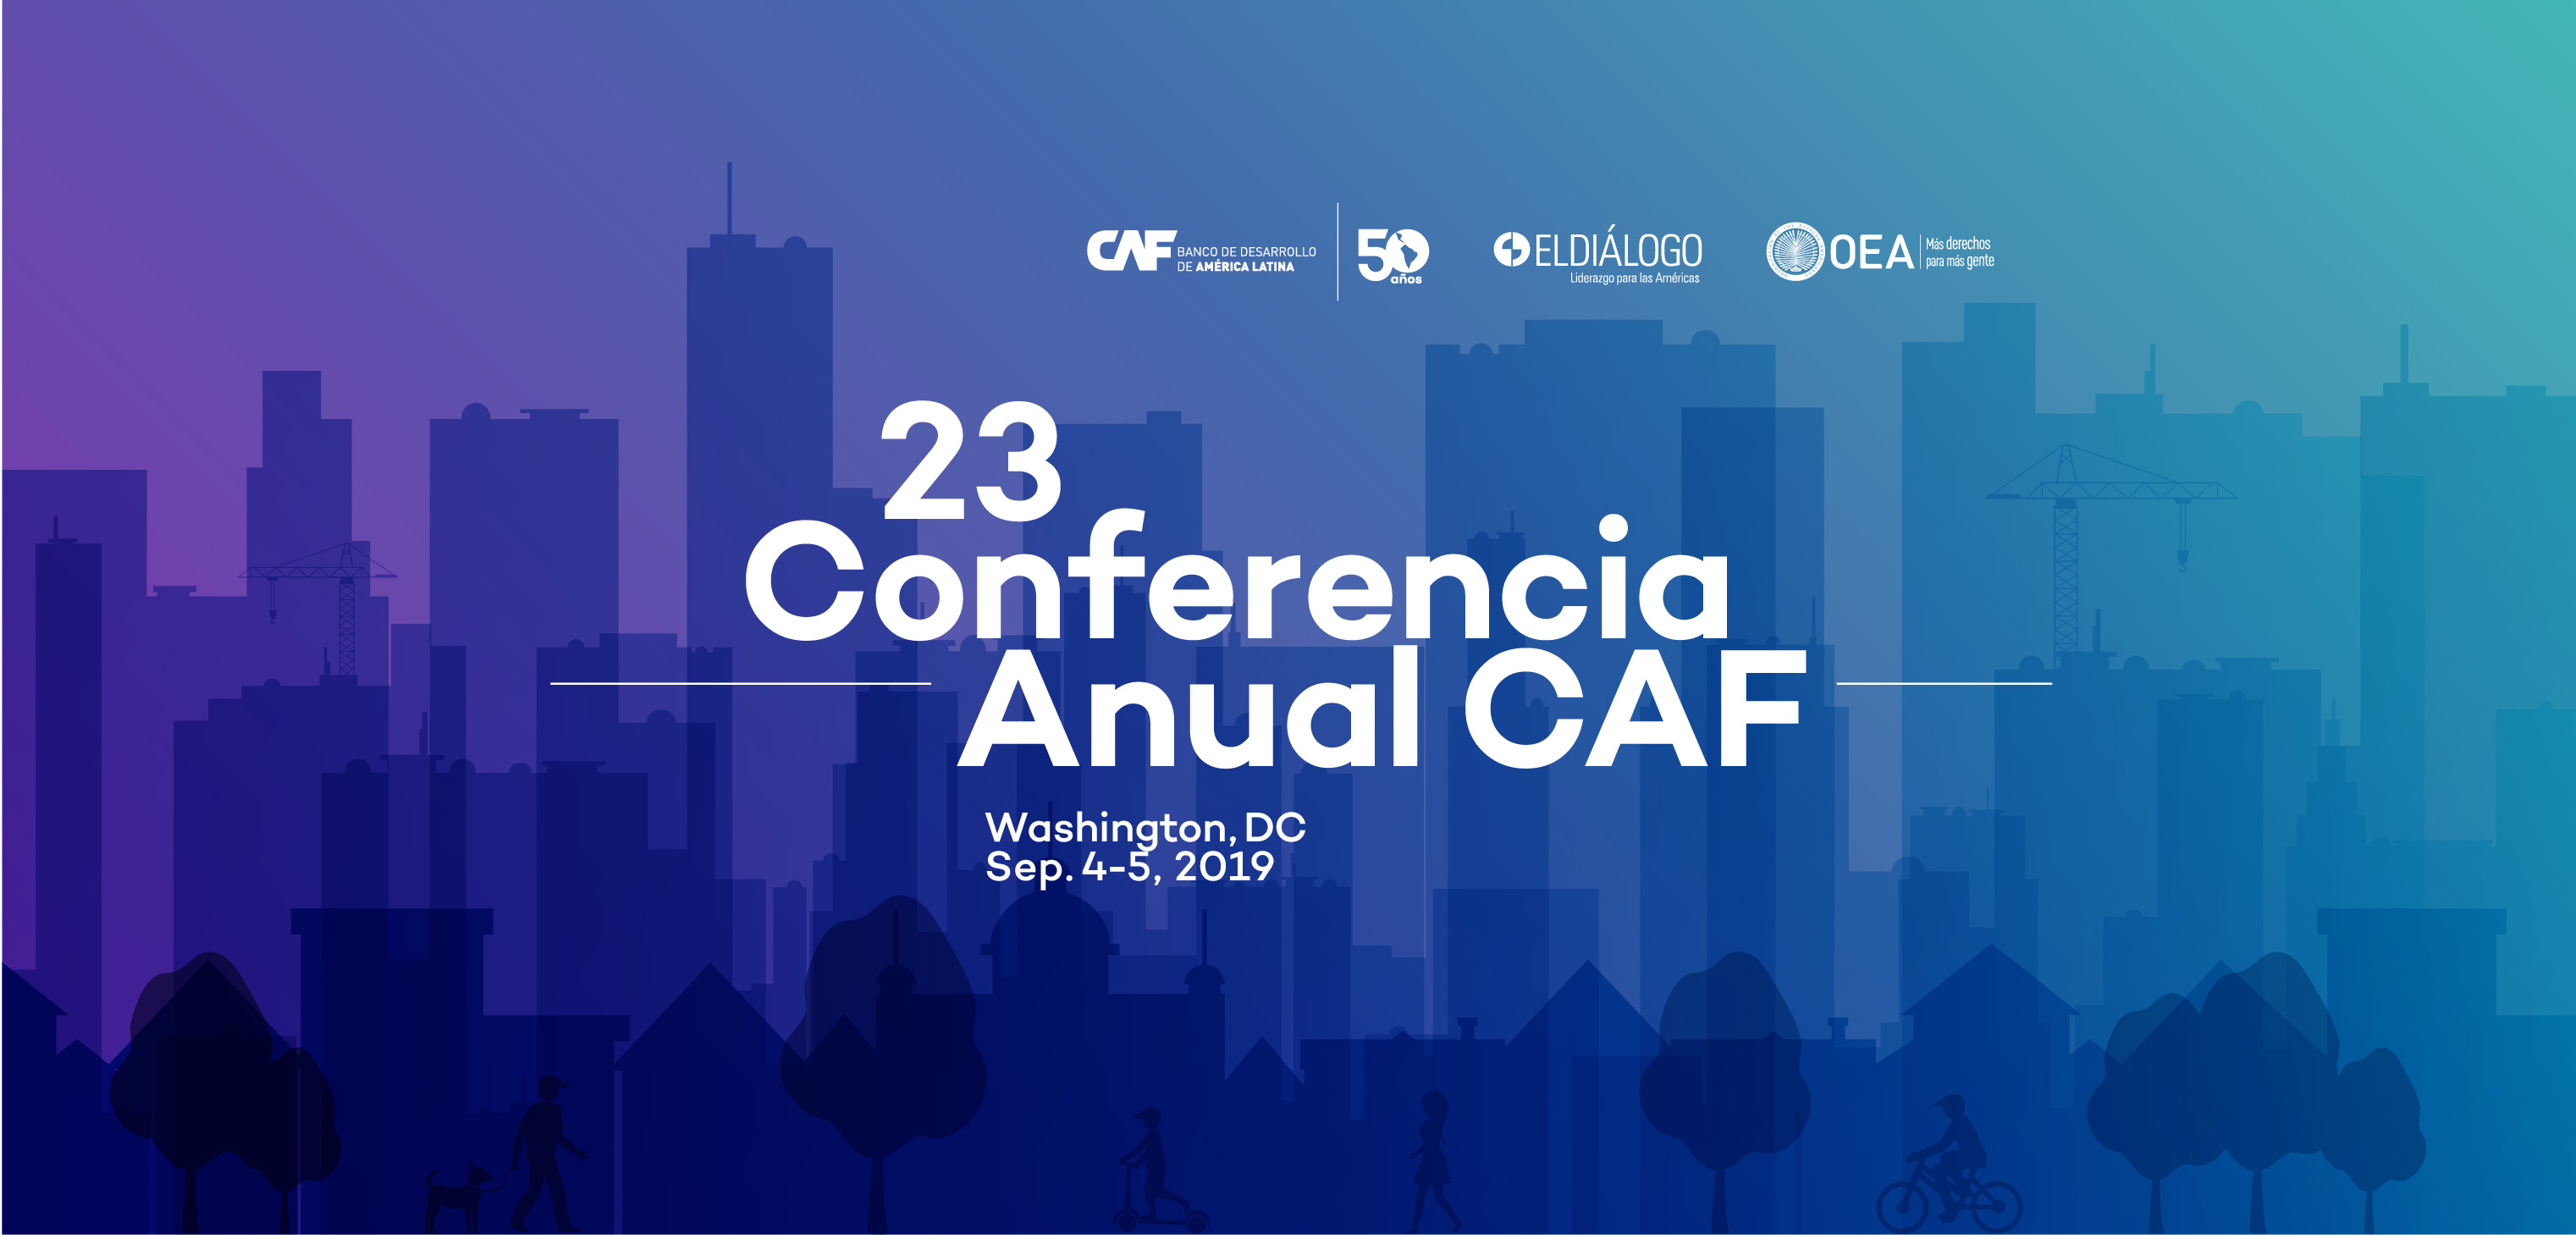 Trade, elections, misinformation and China will set agenda for 23rd CAF Conference